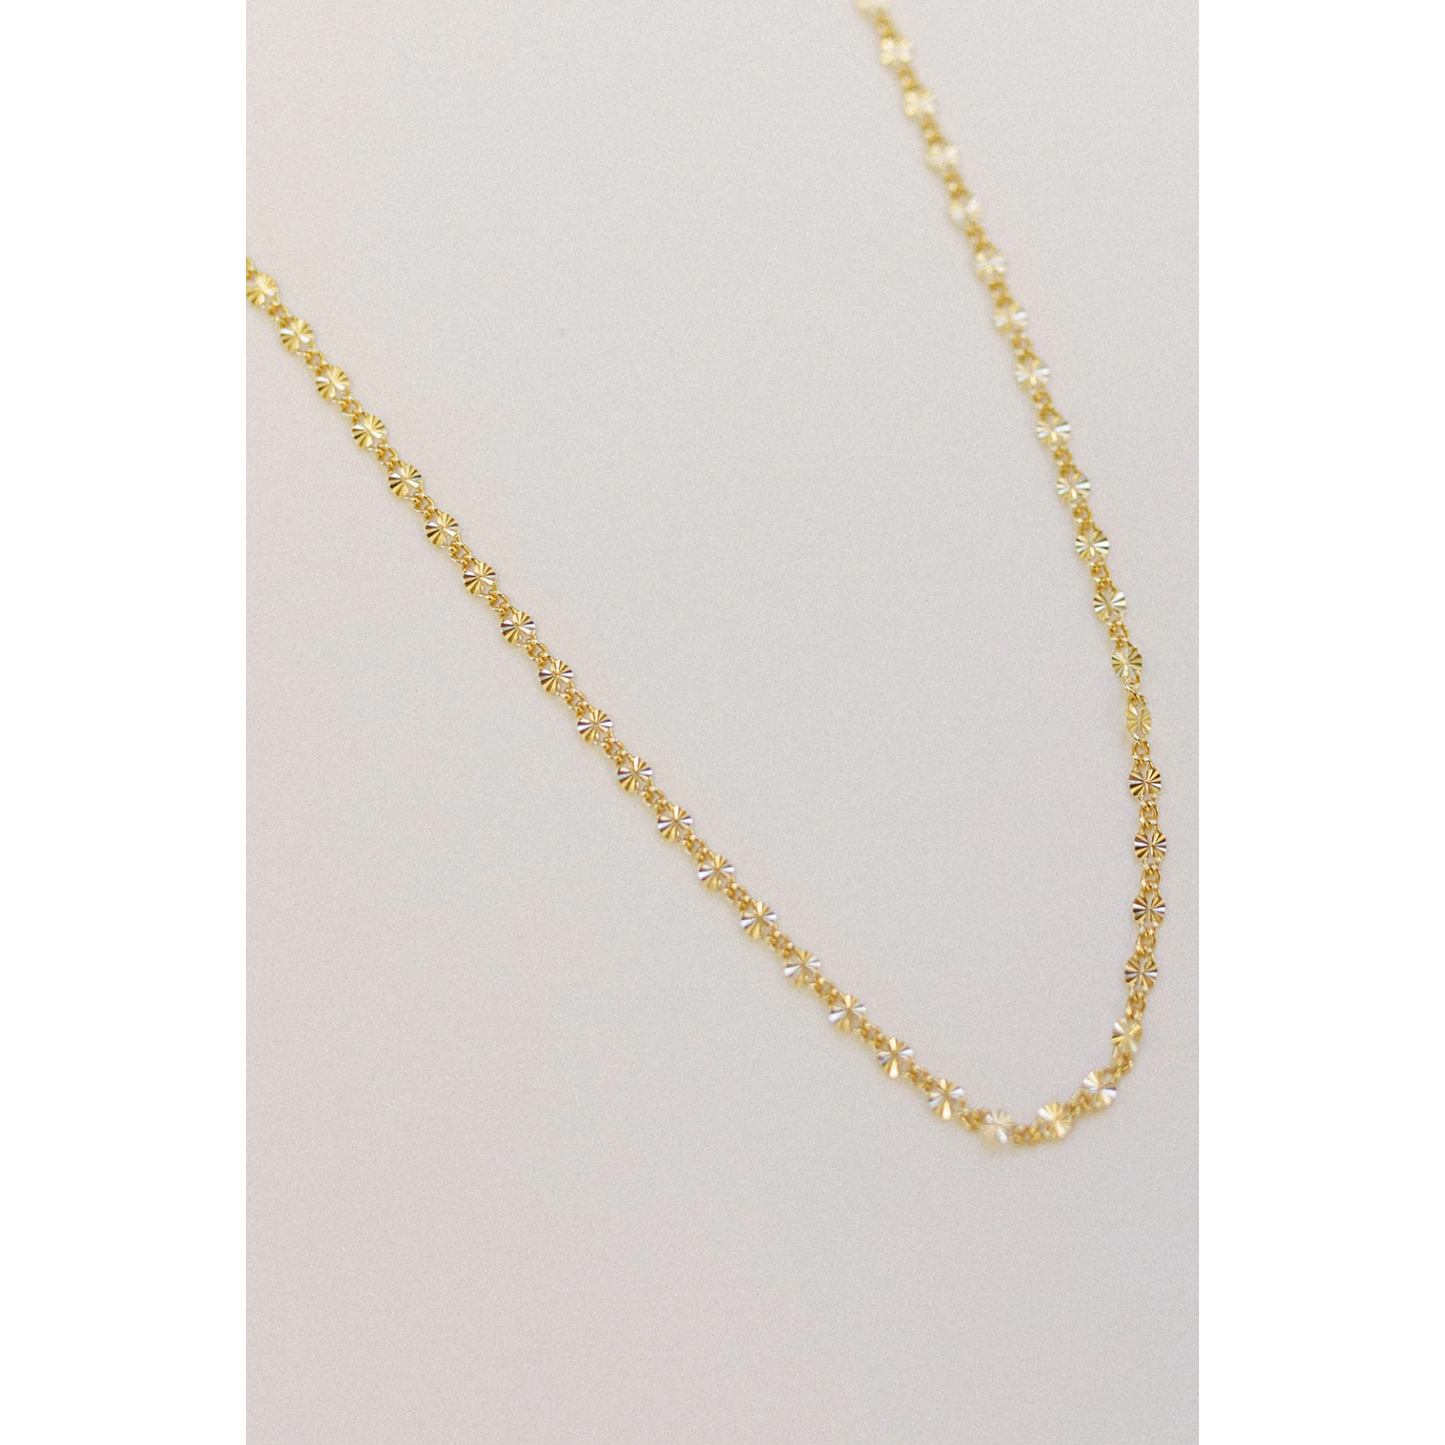 Our Spare Change Sunny Chain Necklace